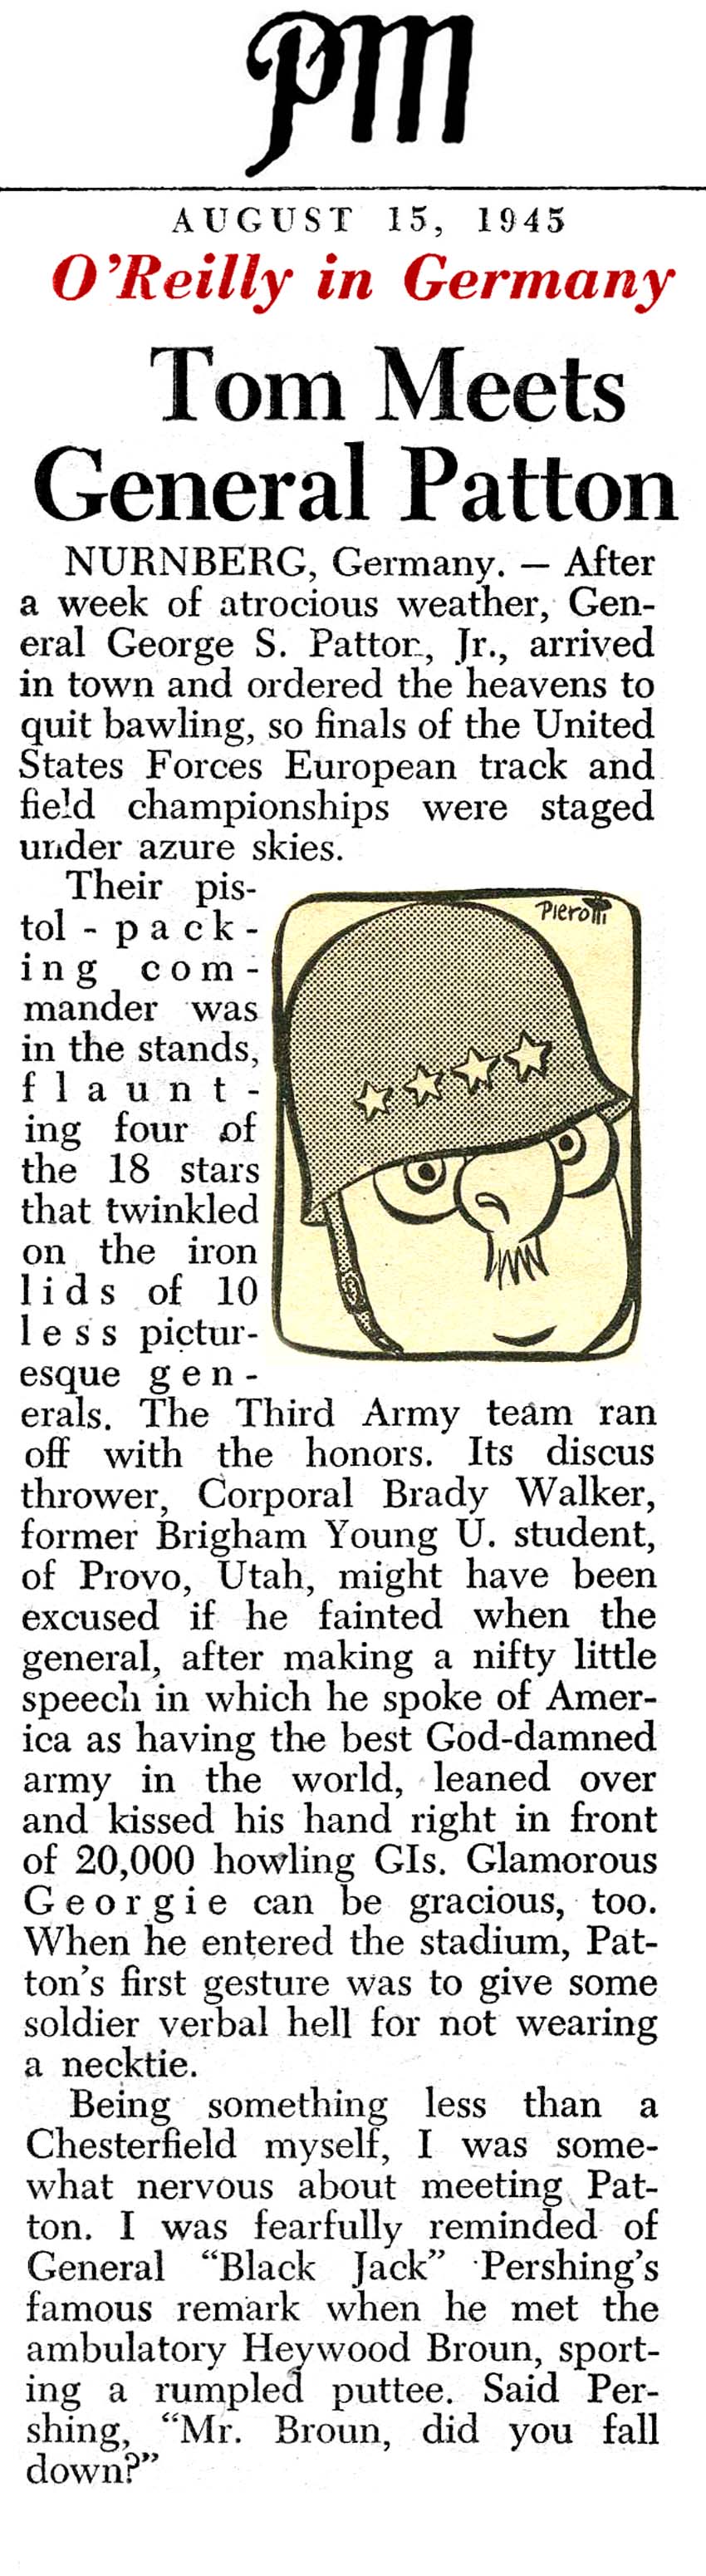 One Journalist's Encounter with General Patton (PM Tabloid, 1945)